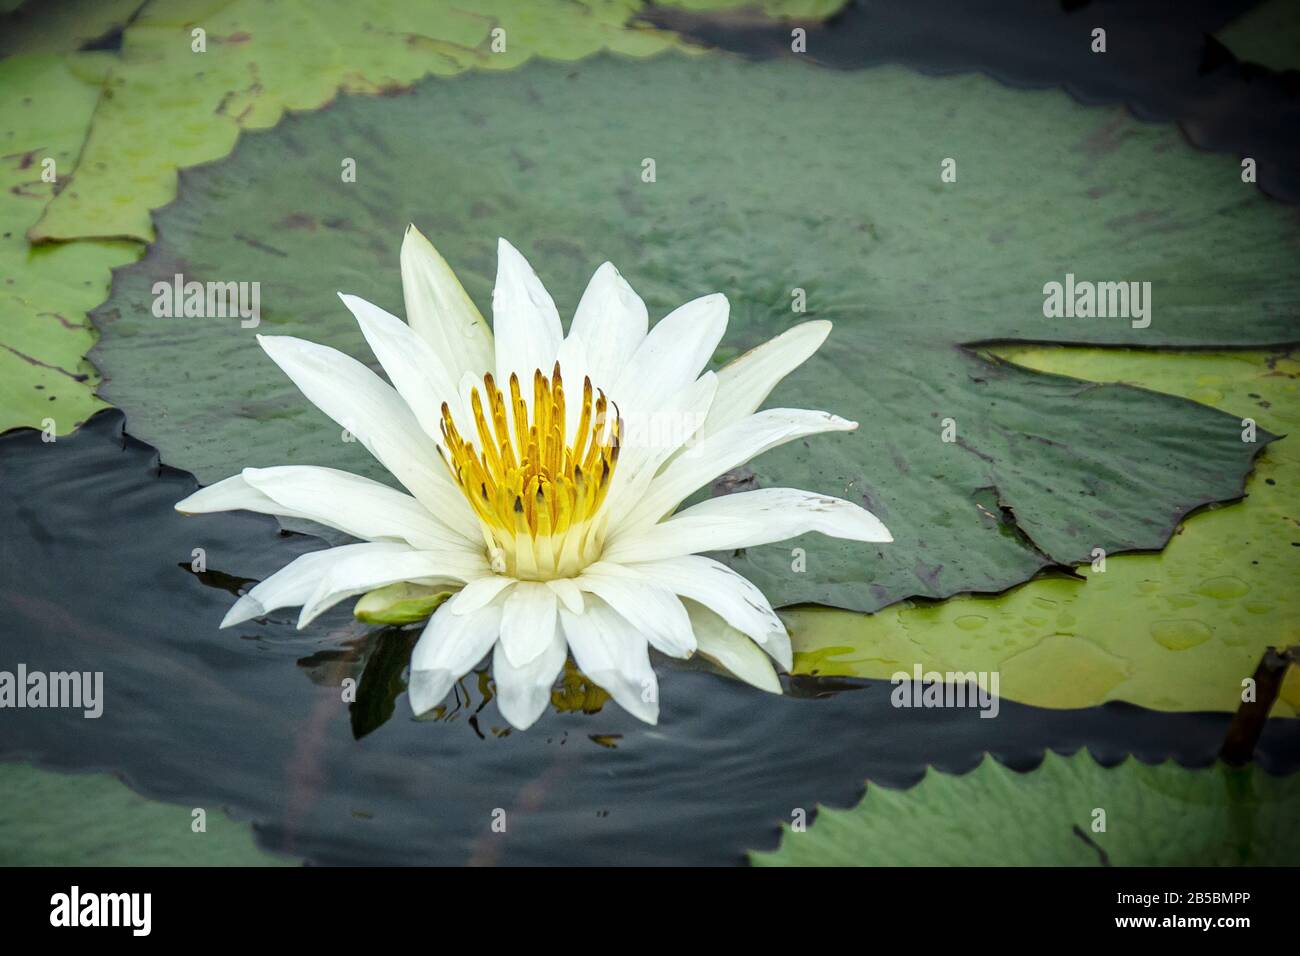 A white water lilly or water rose on the Okavango river. Stock Photo